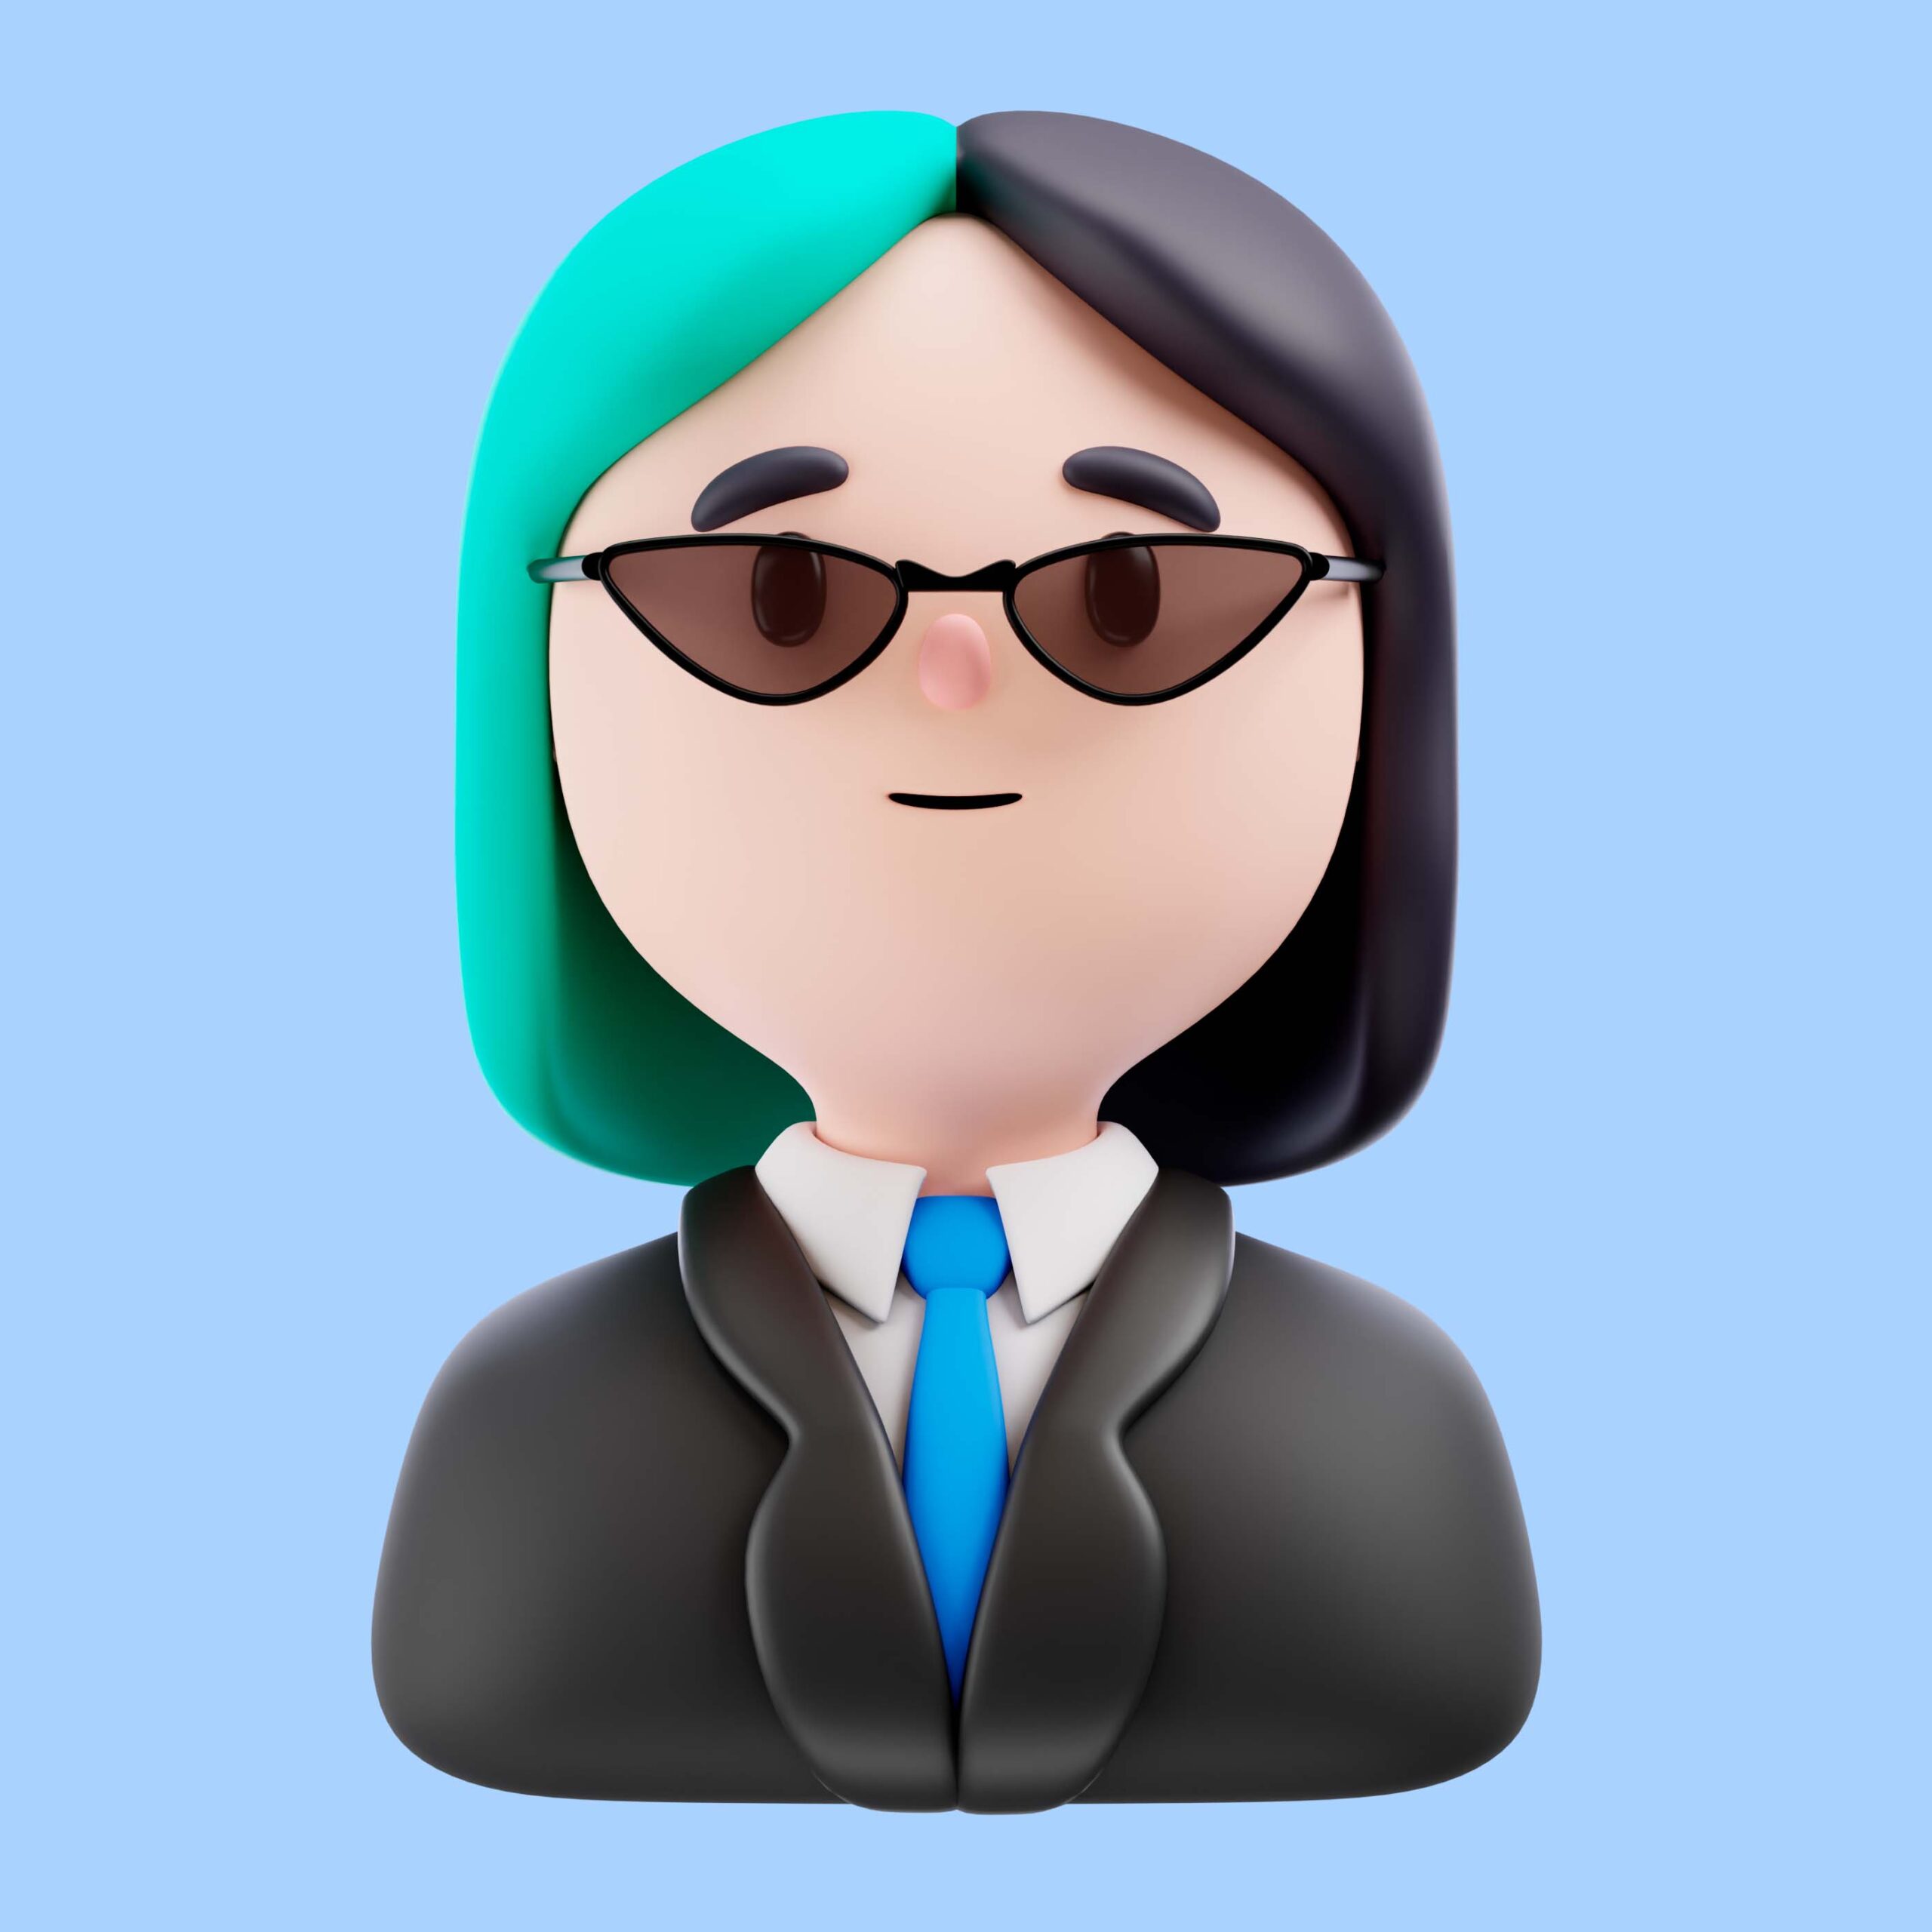 A blue haired woman wearing glasses and a black suit.